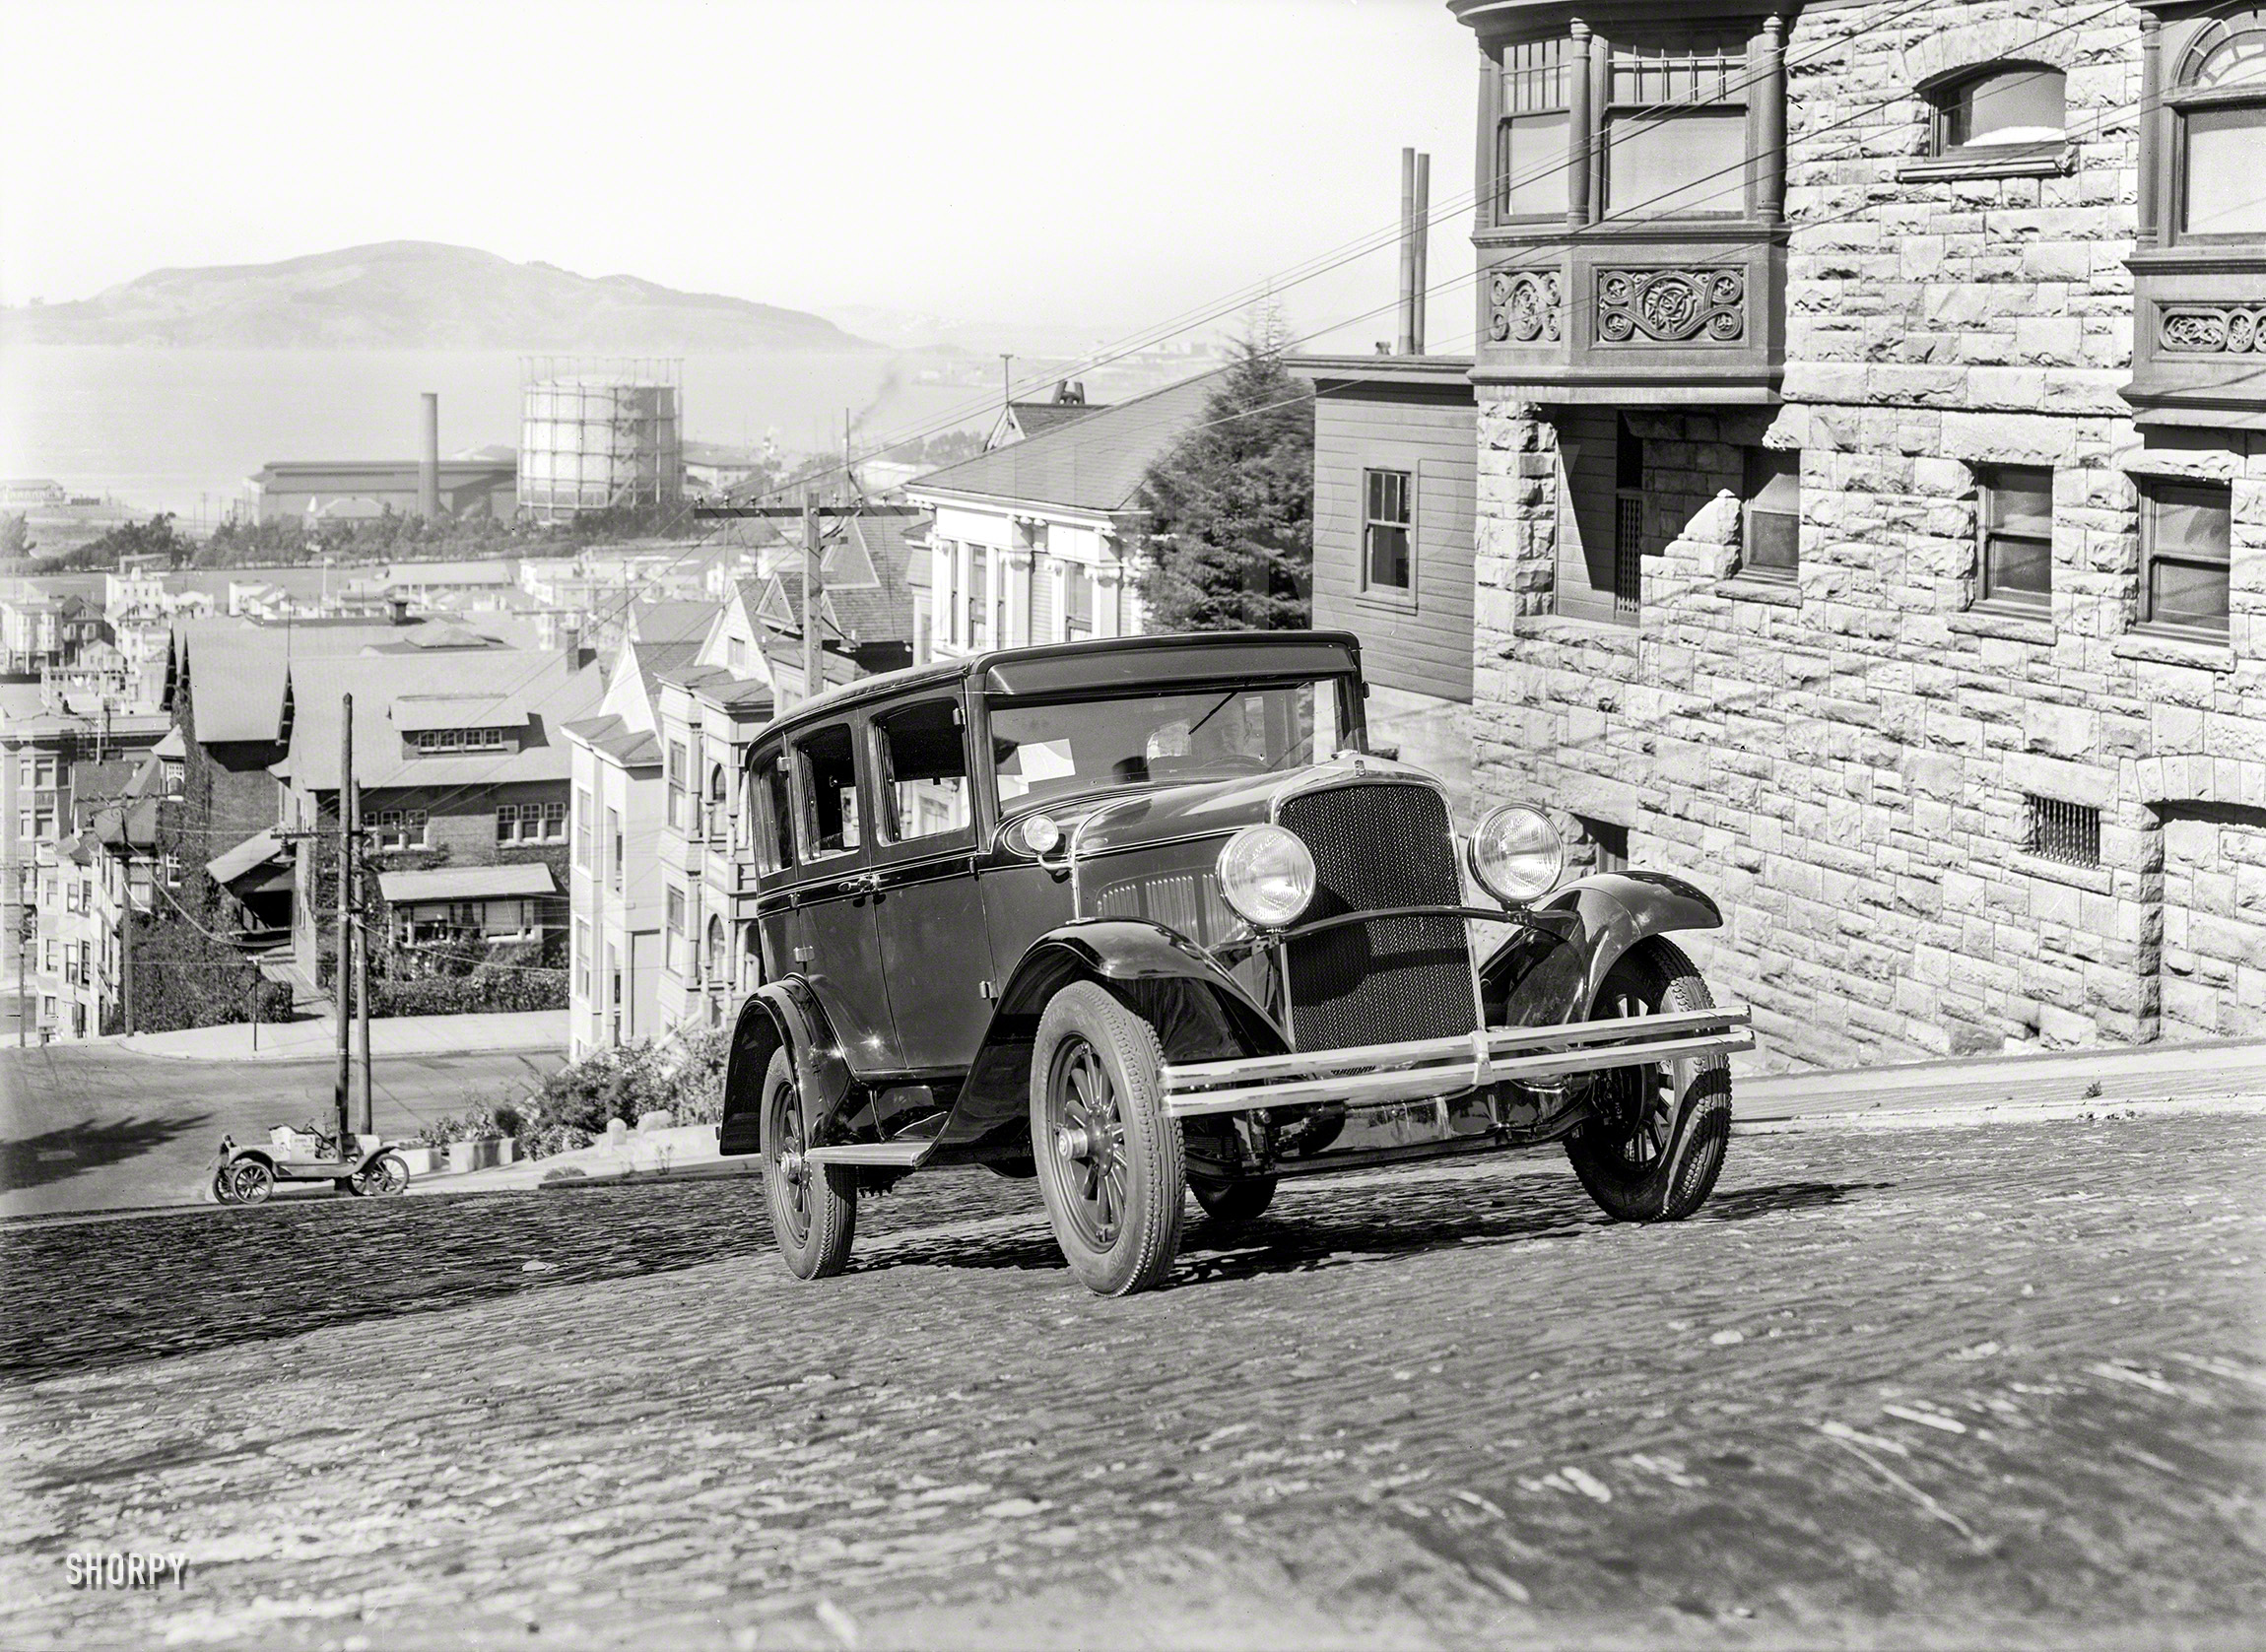 San Francisco circa 1928. "DeSoto sedan." Continuing our recent theme of cars-going-uphill, an early example of the marque passing a building we've seen here and here. 5x7 glass negative by Christopher Helin. View full size.